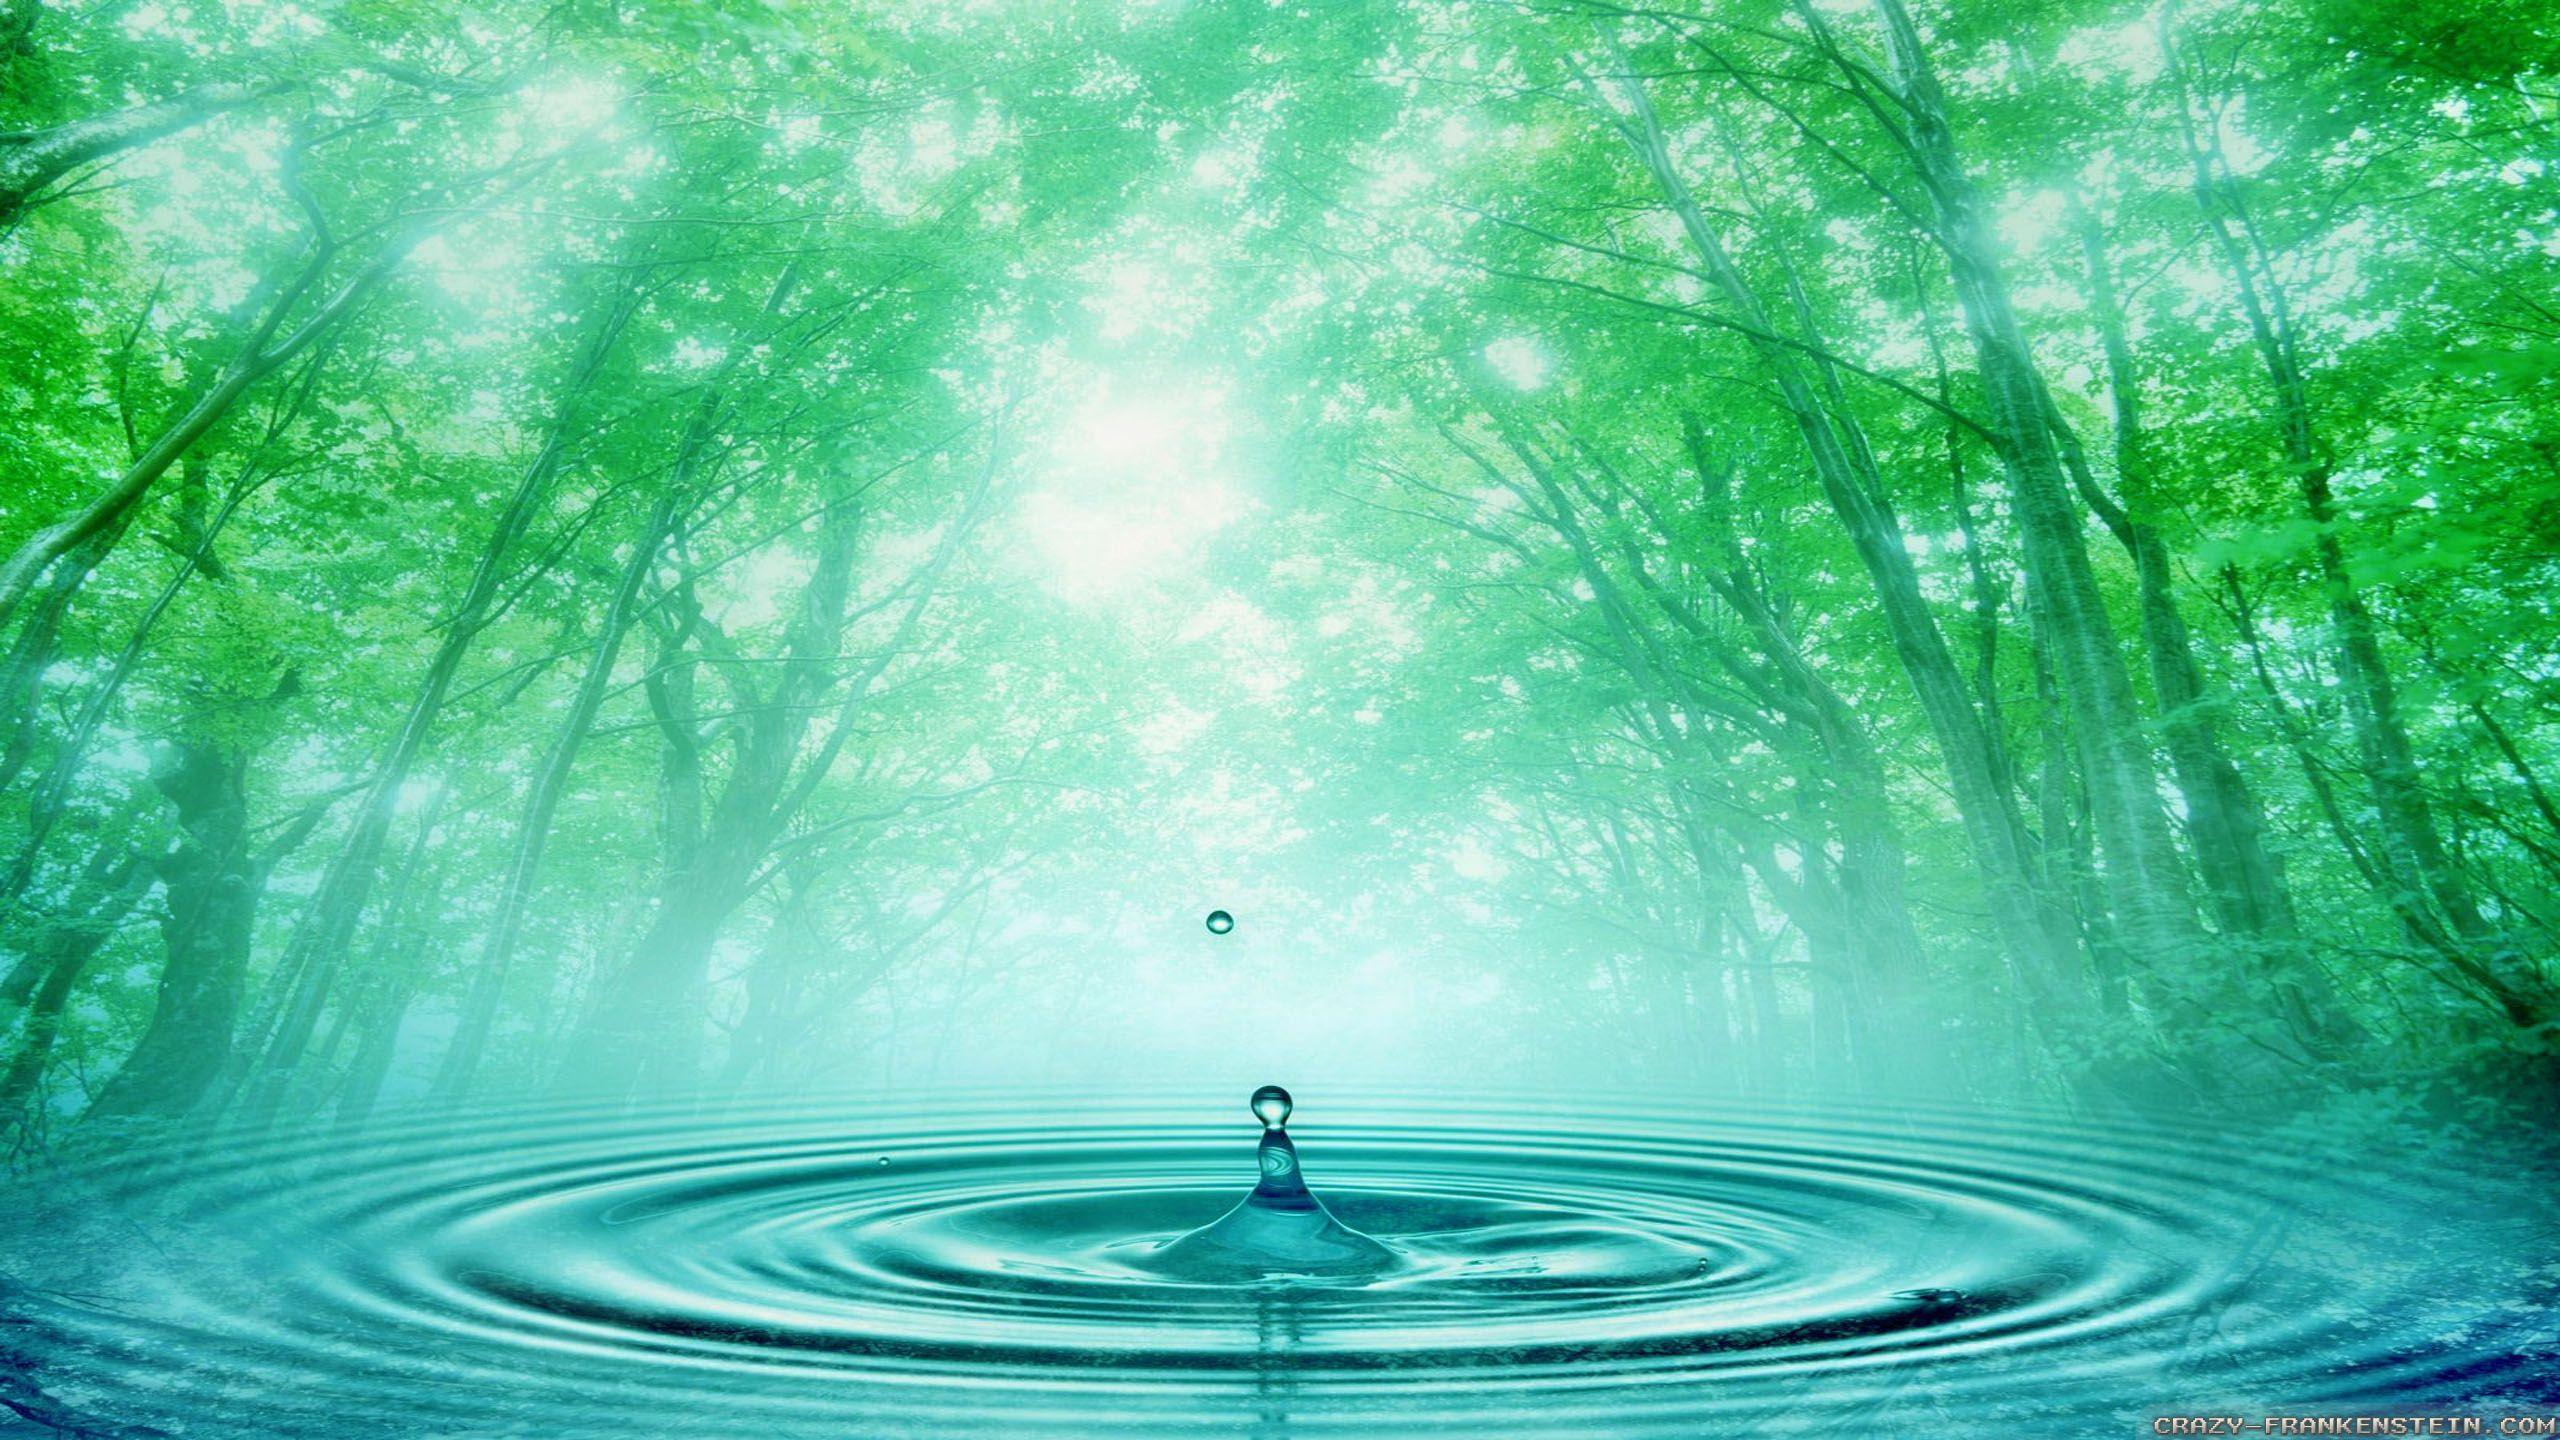 Spring Water Wallpapers Top Free Spring Water Backgrounds